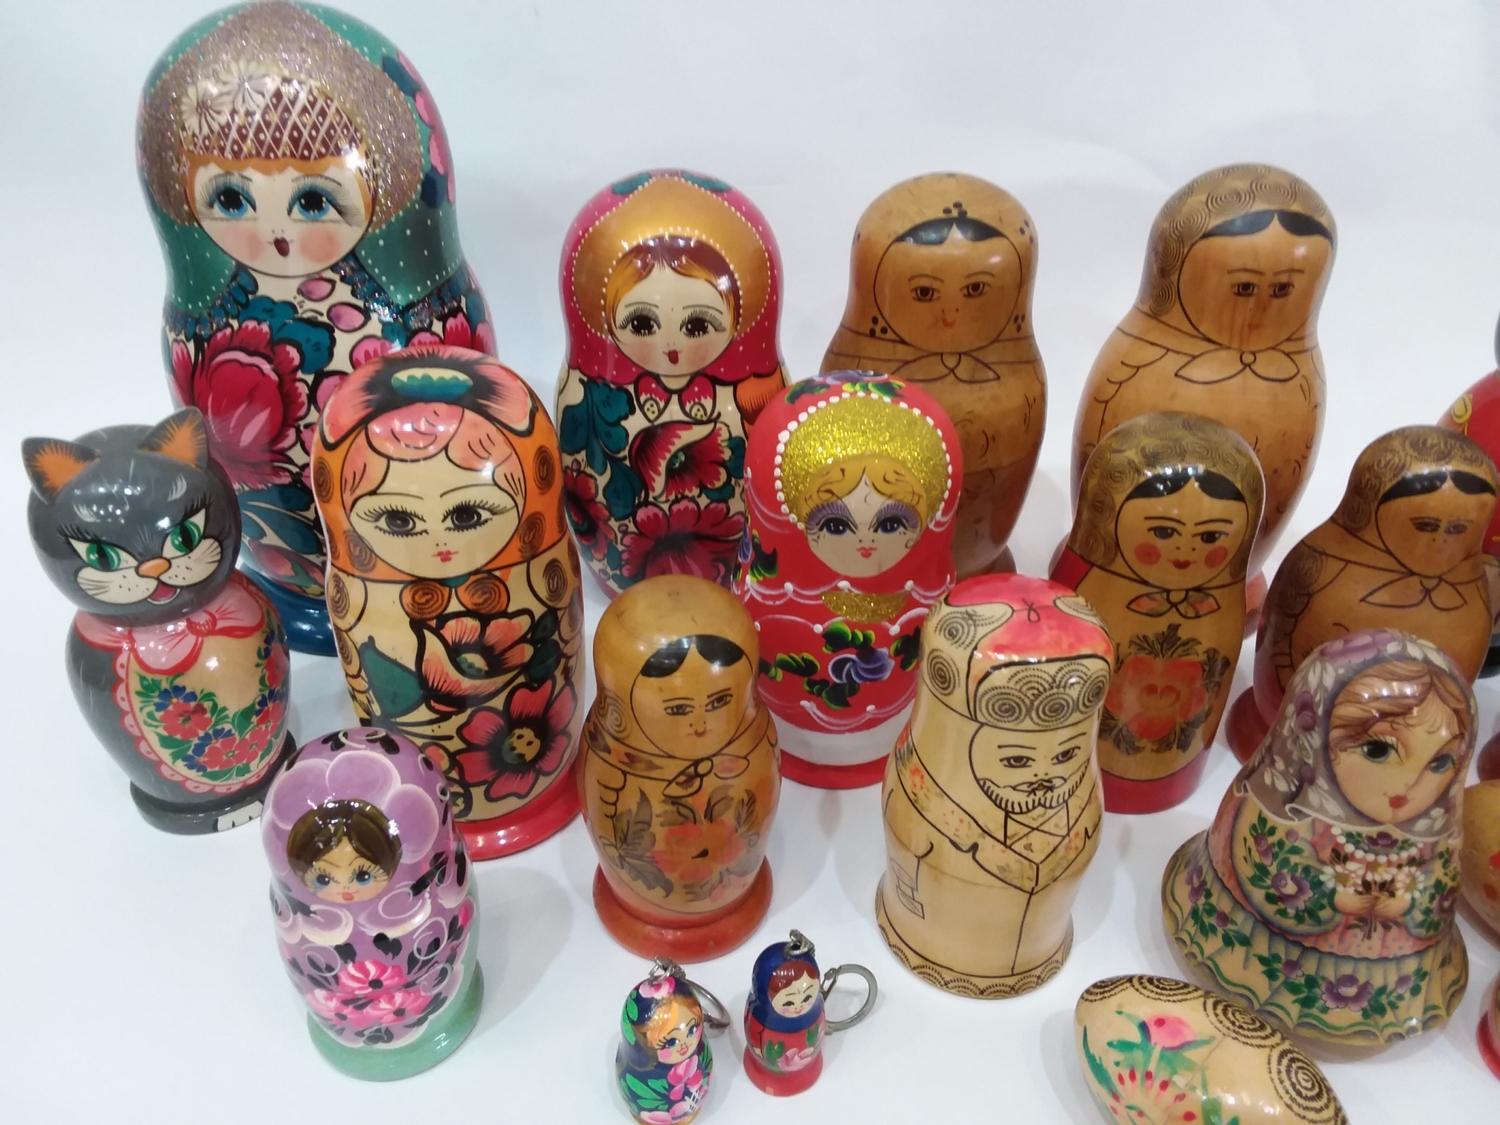 Collection of Russian Nesting Dolls - Image 4 of 6